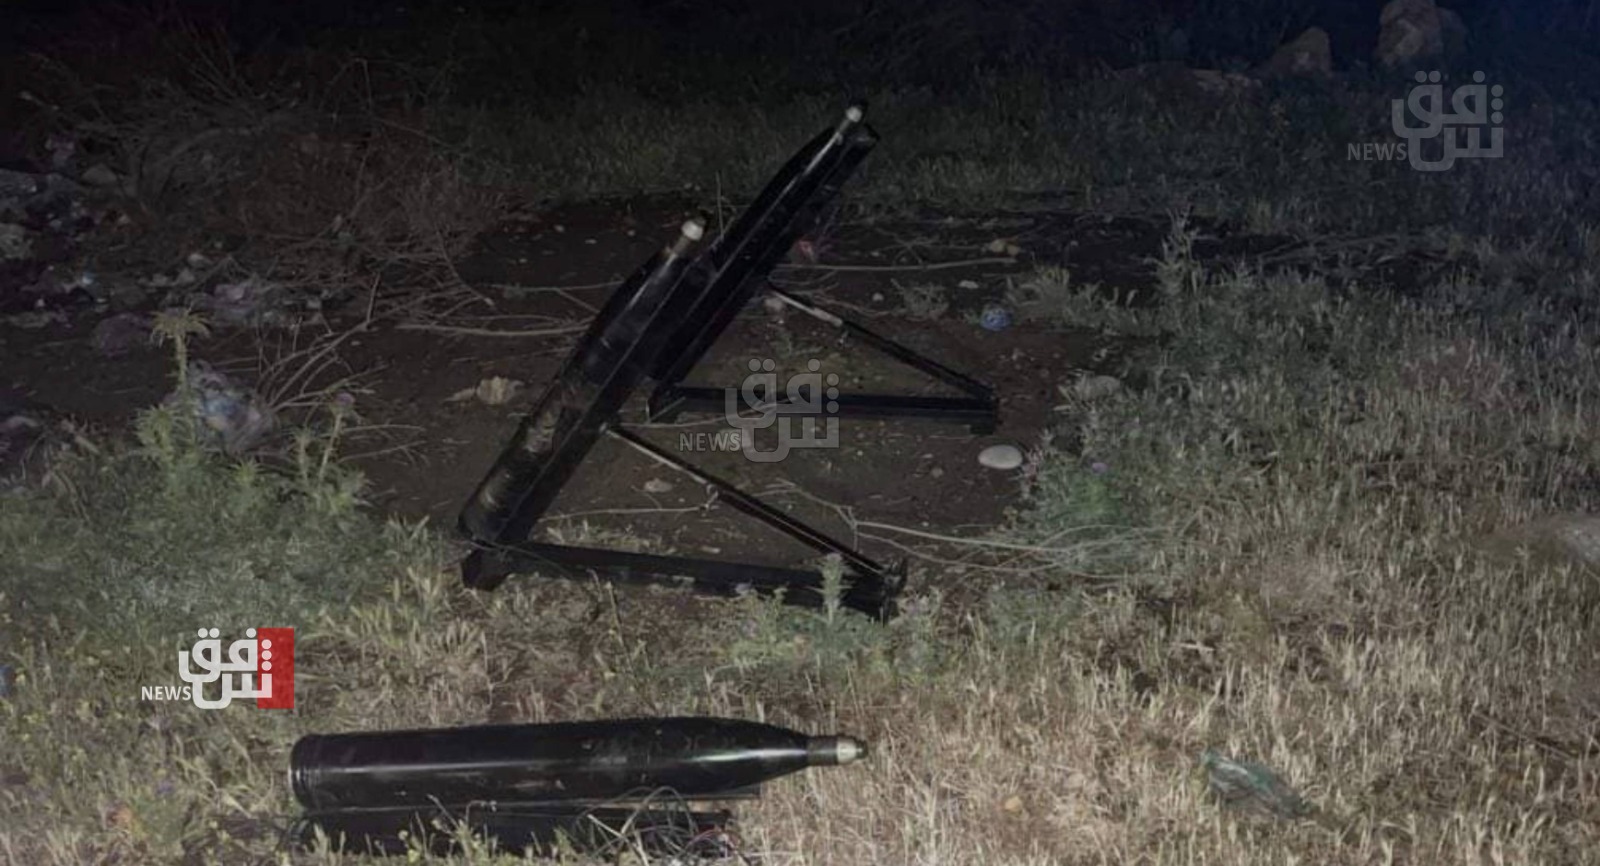 Security forces seize a rocket launchpad in Nineveh plane